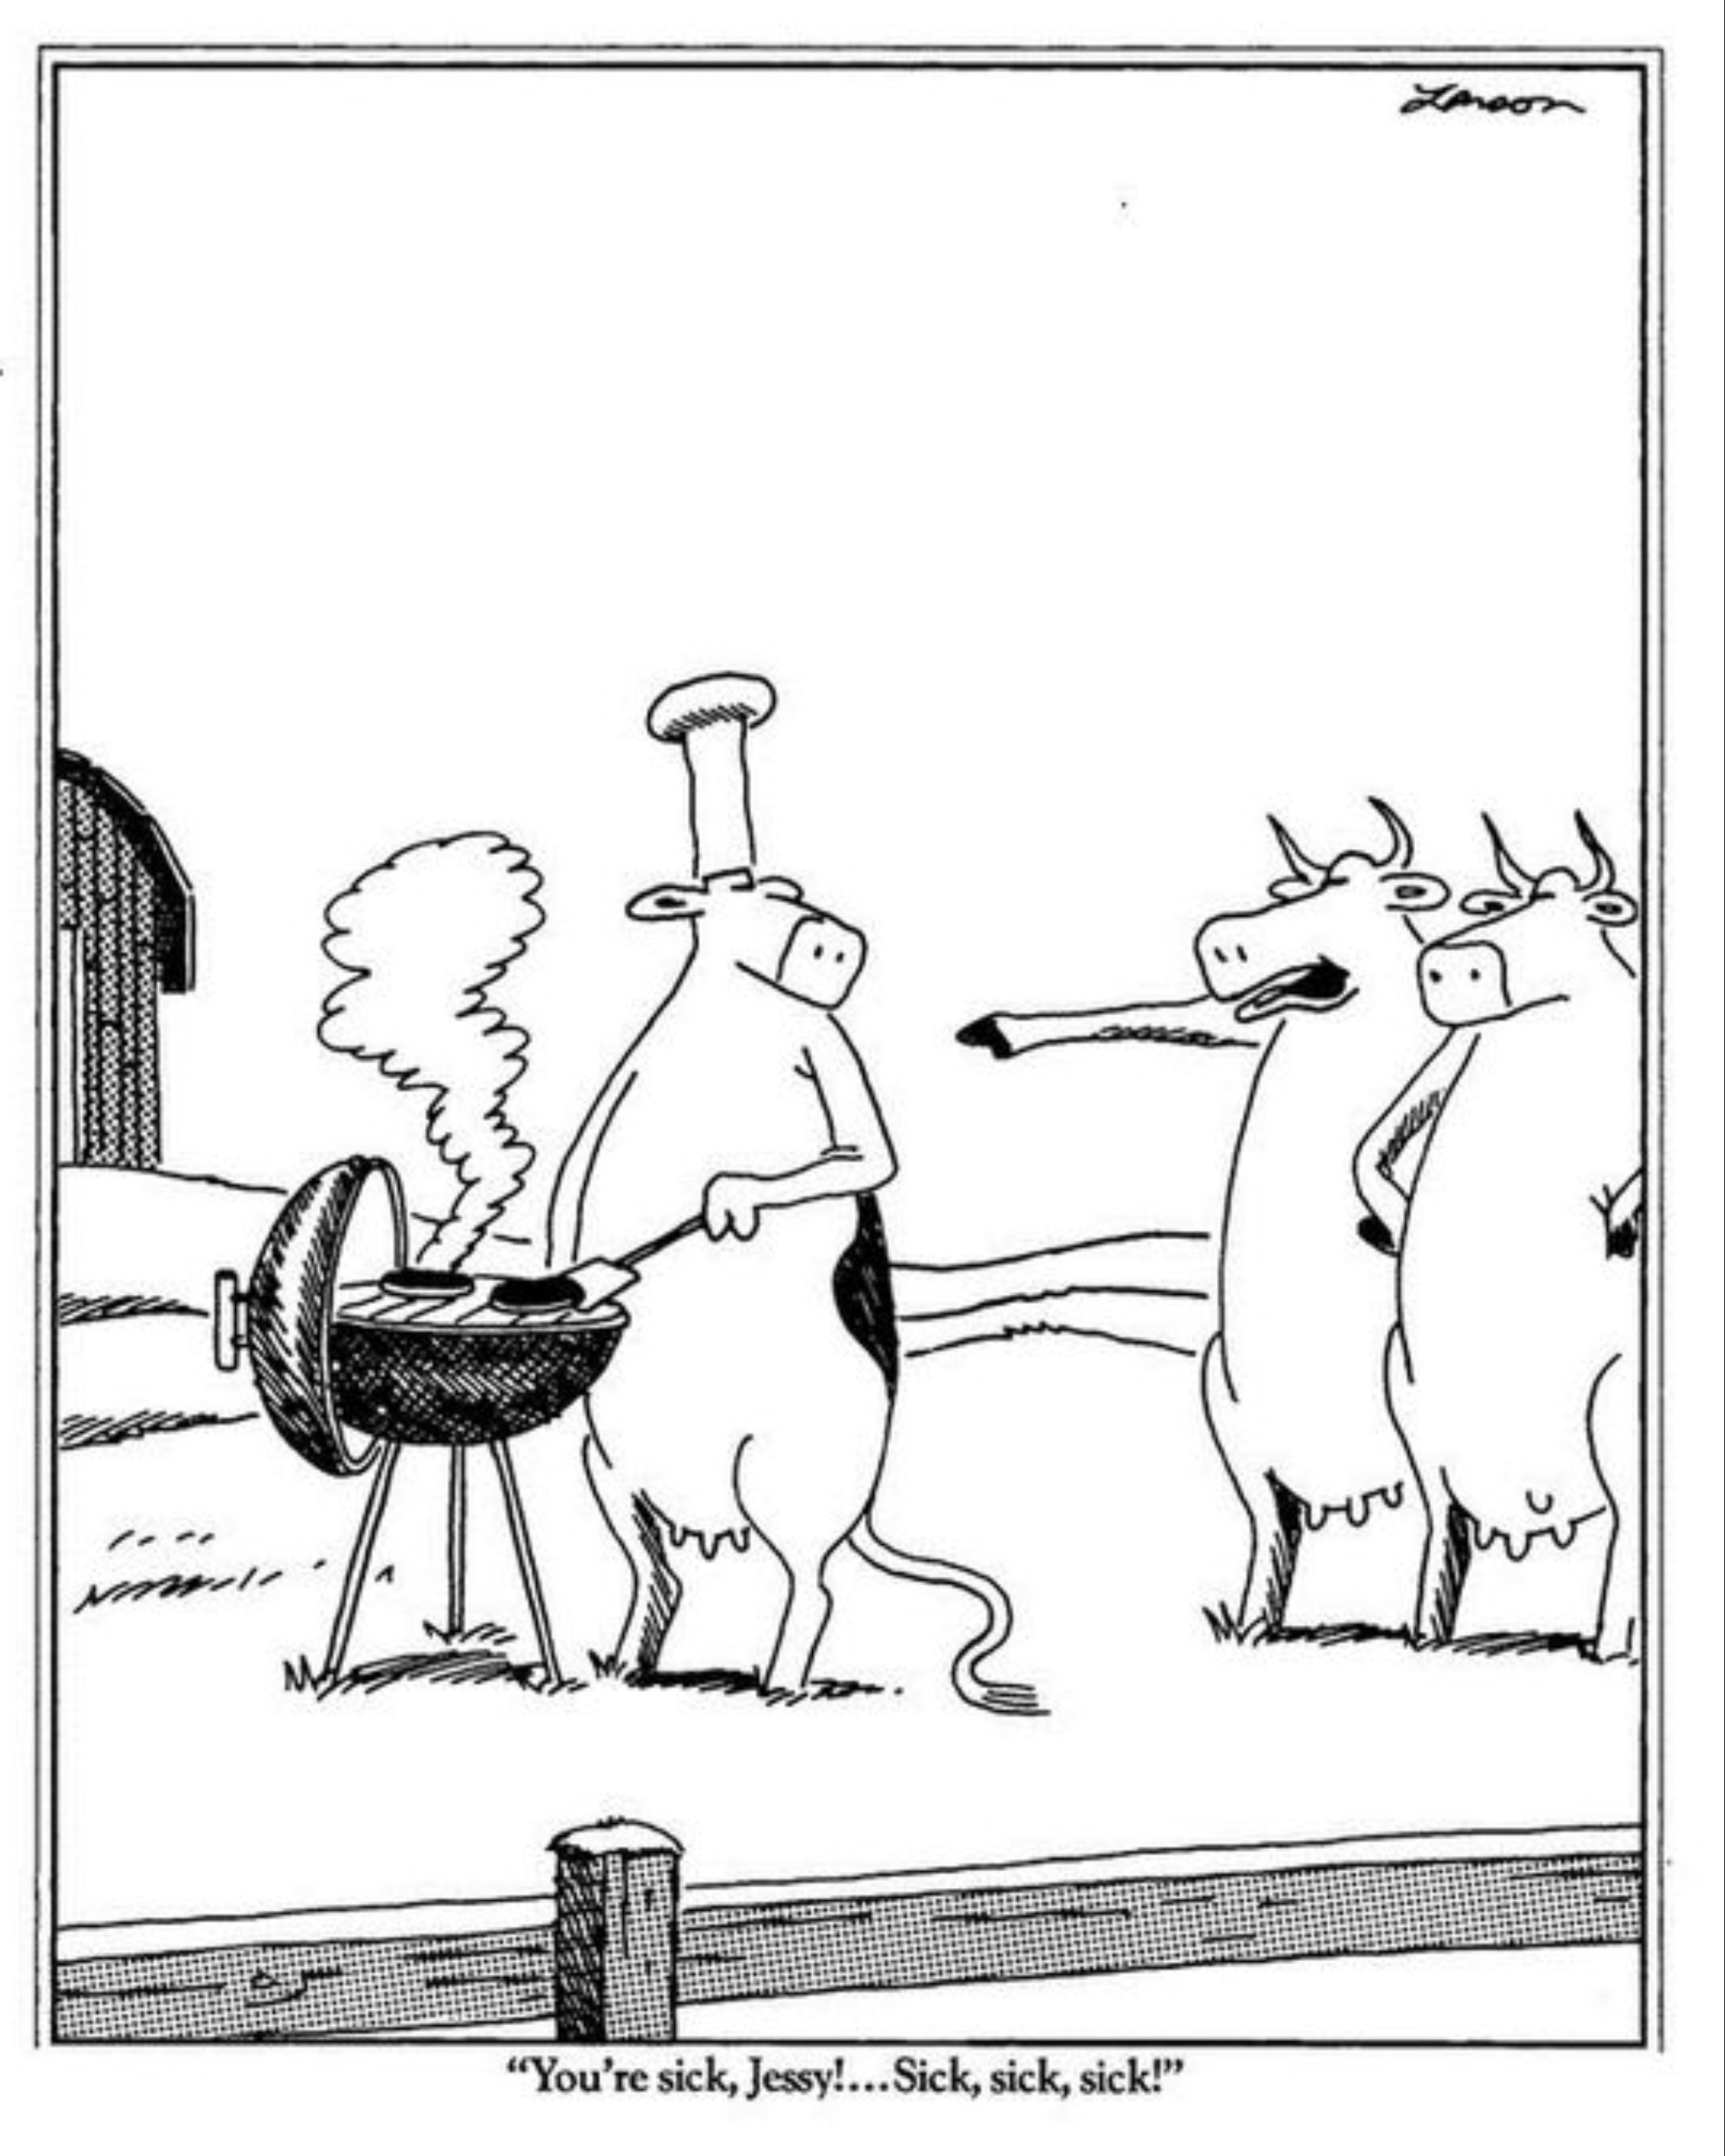 Cow eating a hamburger in The Far Side.